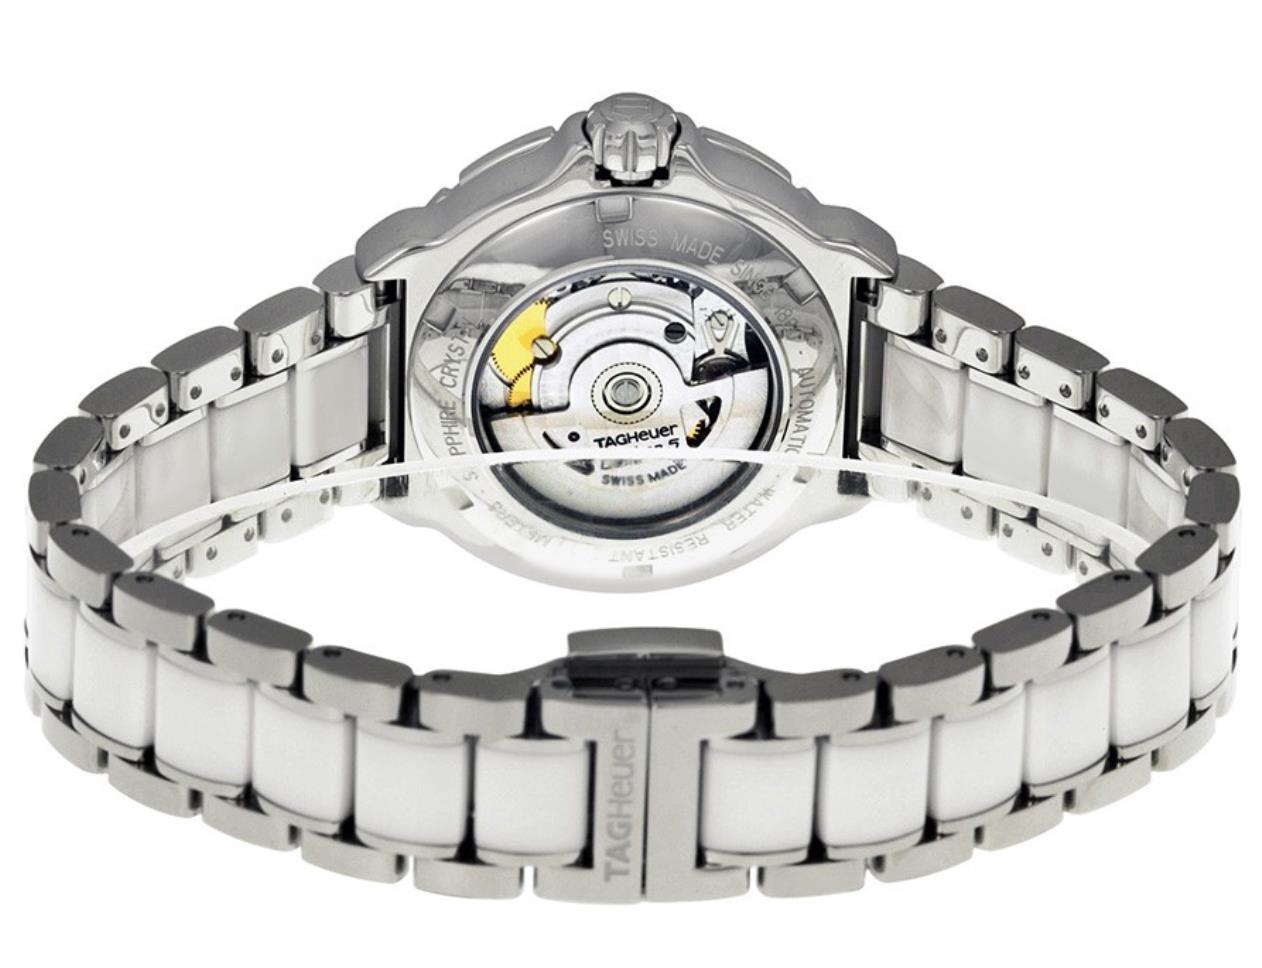 The exact replica watch is equipped with caliber 5.